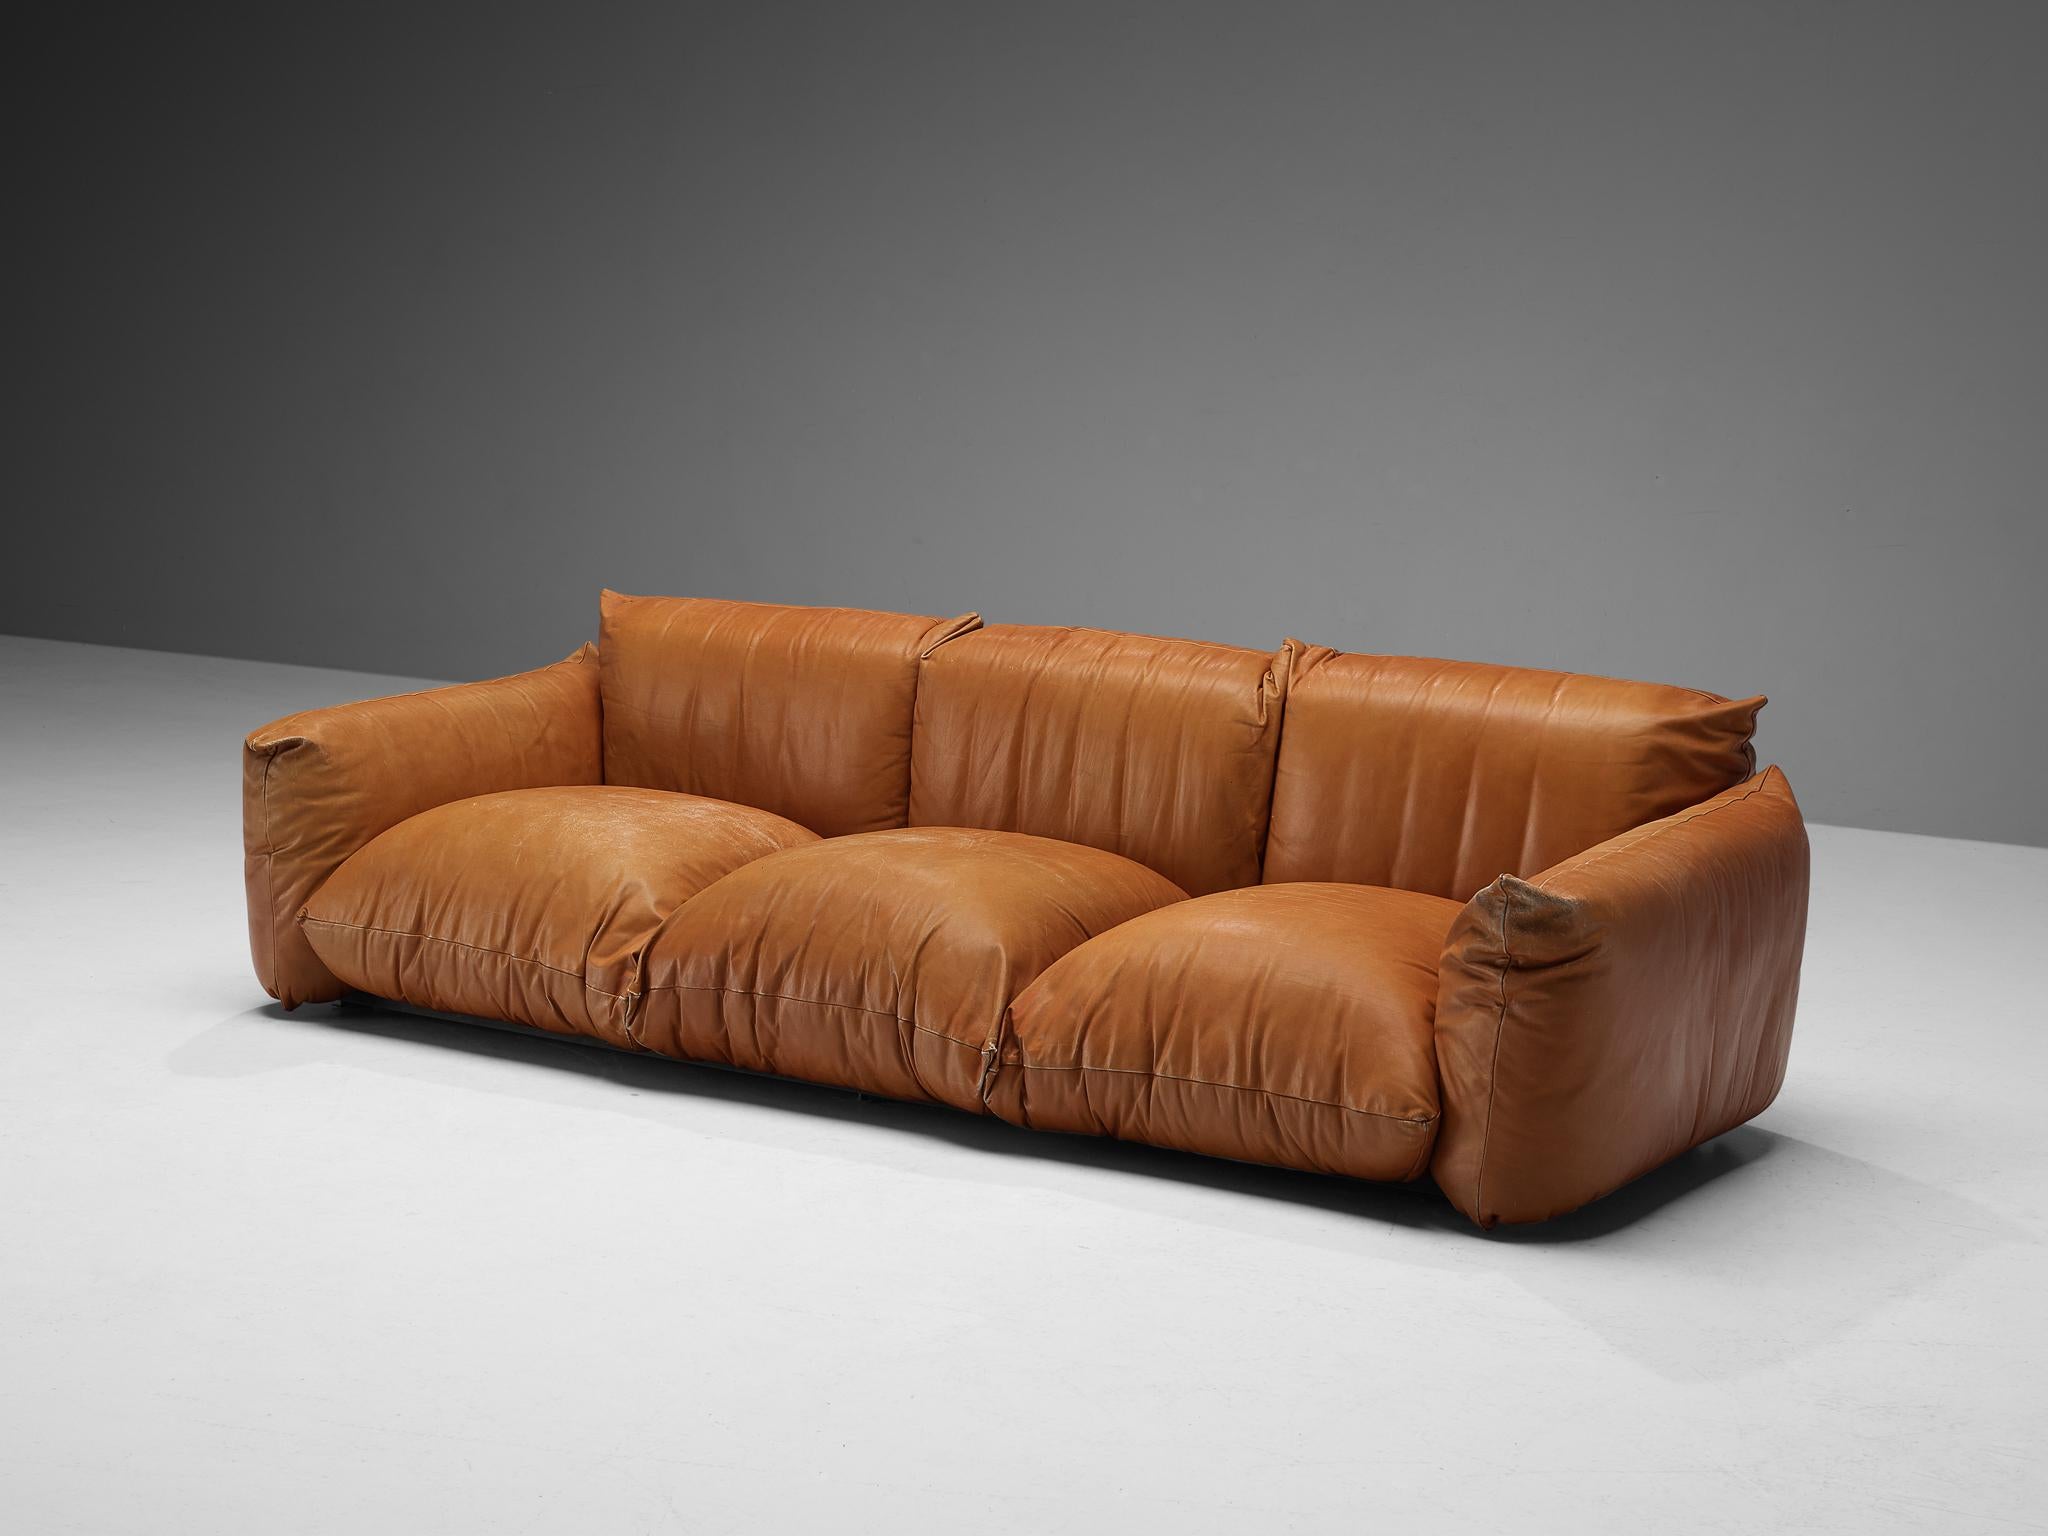 Mario Marenco for Arflex, 'Marenco' sofa, leather, Italy, design 1970

This luscious and utterly comfortable three seat sofa is designed by the Italian designer Mario Marenco in 1970. The sofa is made in a beautifully patinated cognac leather, and